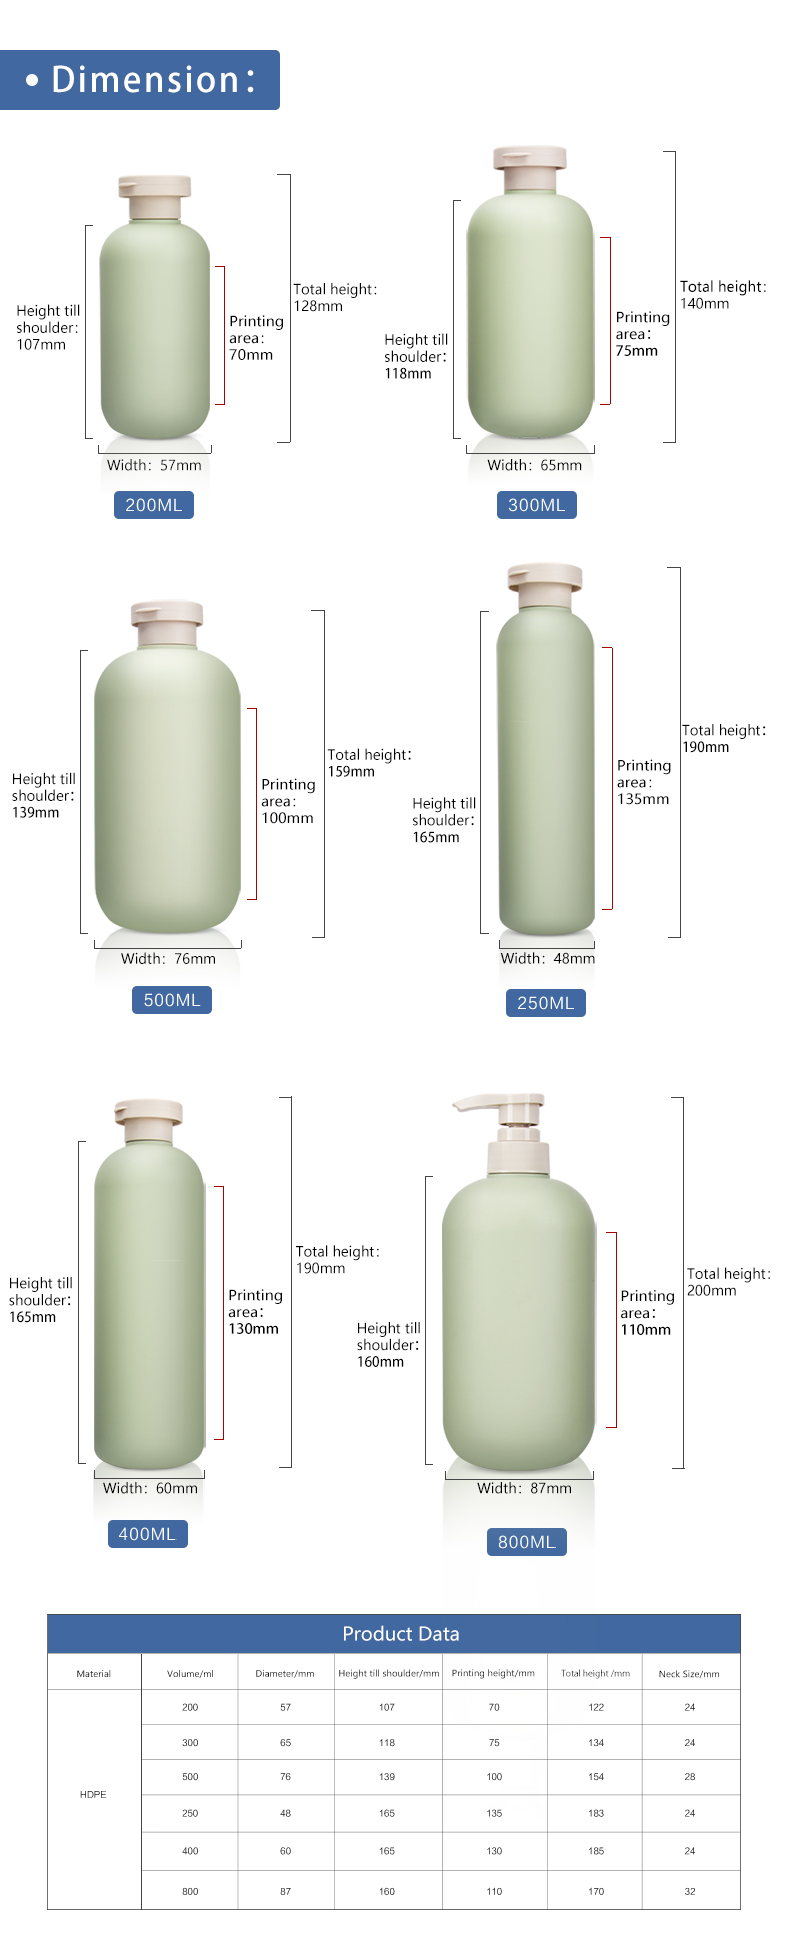 Green Series HDPE Plastic Body Lotion Bottle with Soft Touch Effect